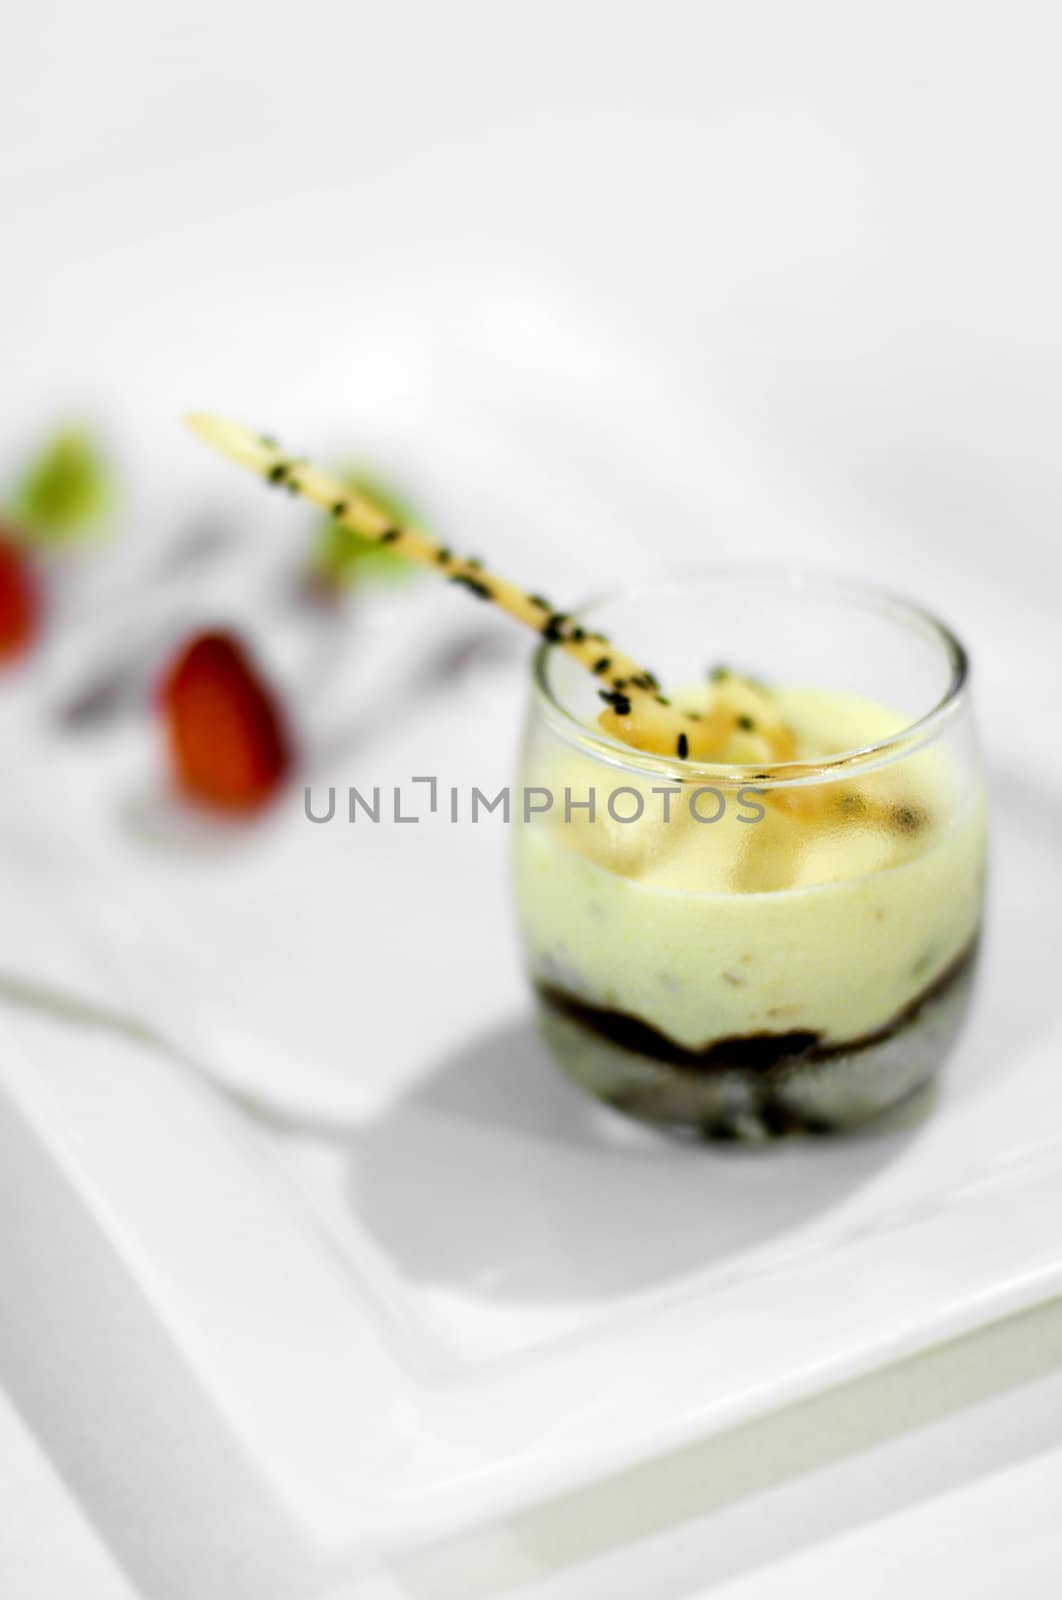 A creamy dessert with crushed pistachio nuts and chocolate ganache, served with fresh caramel fruits